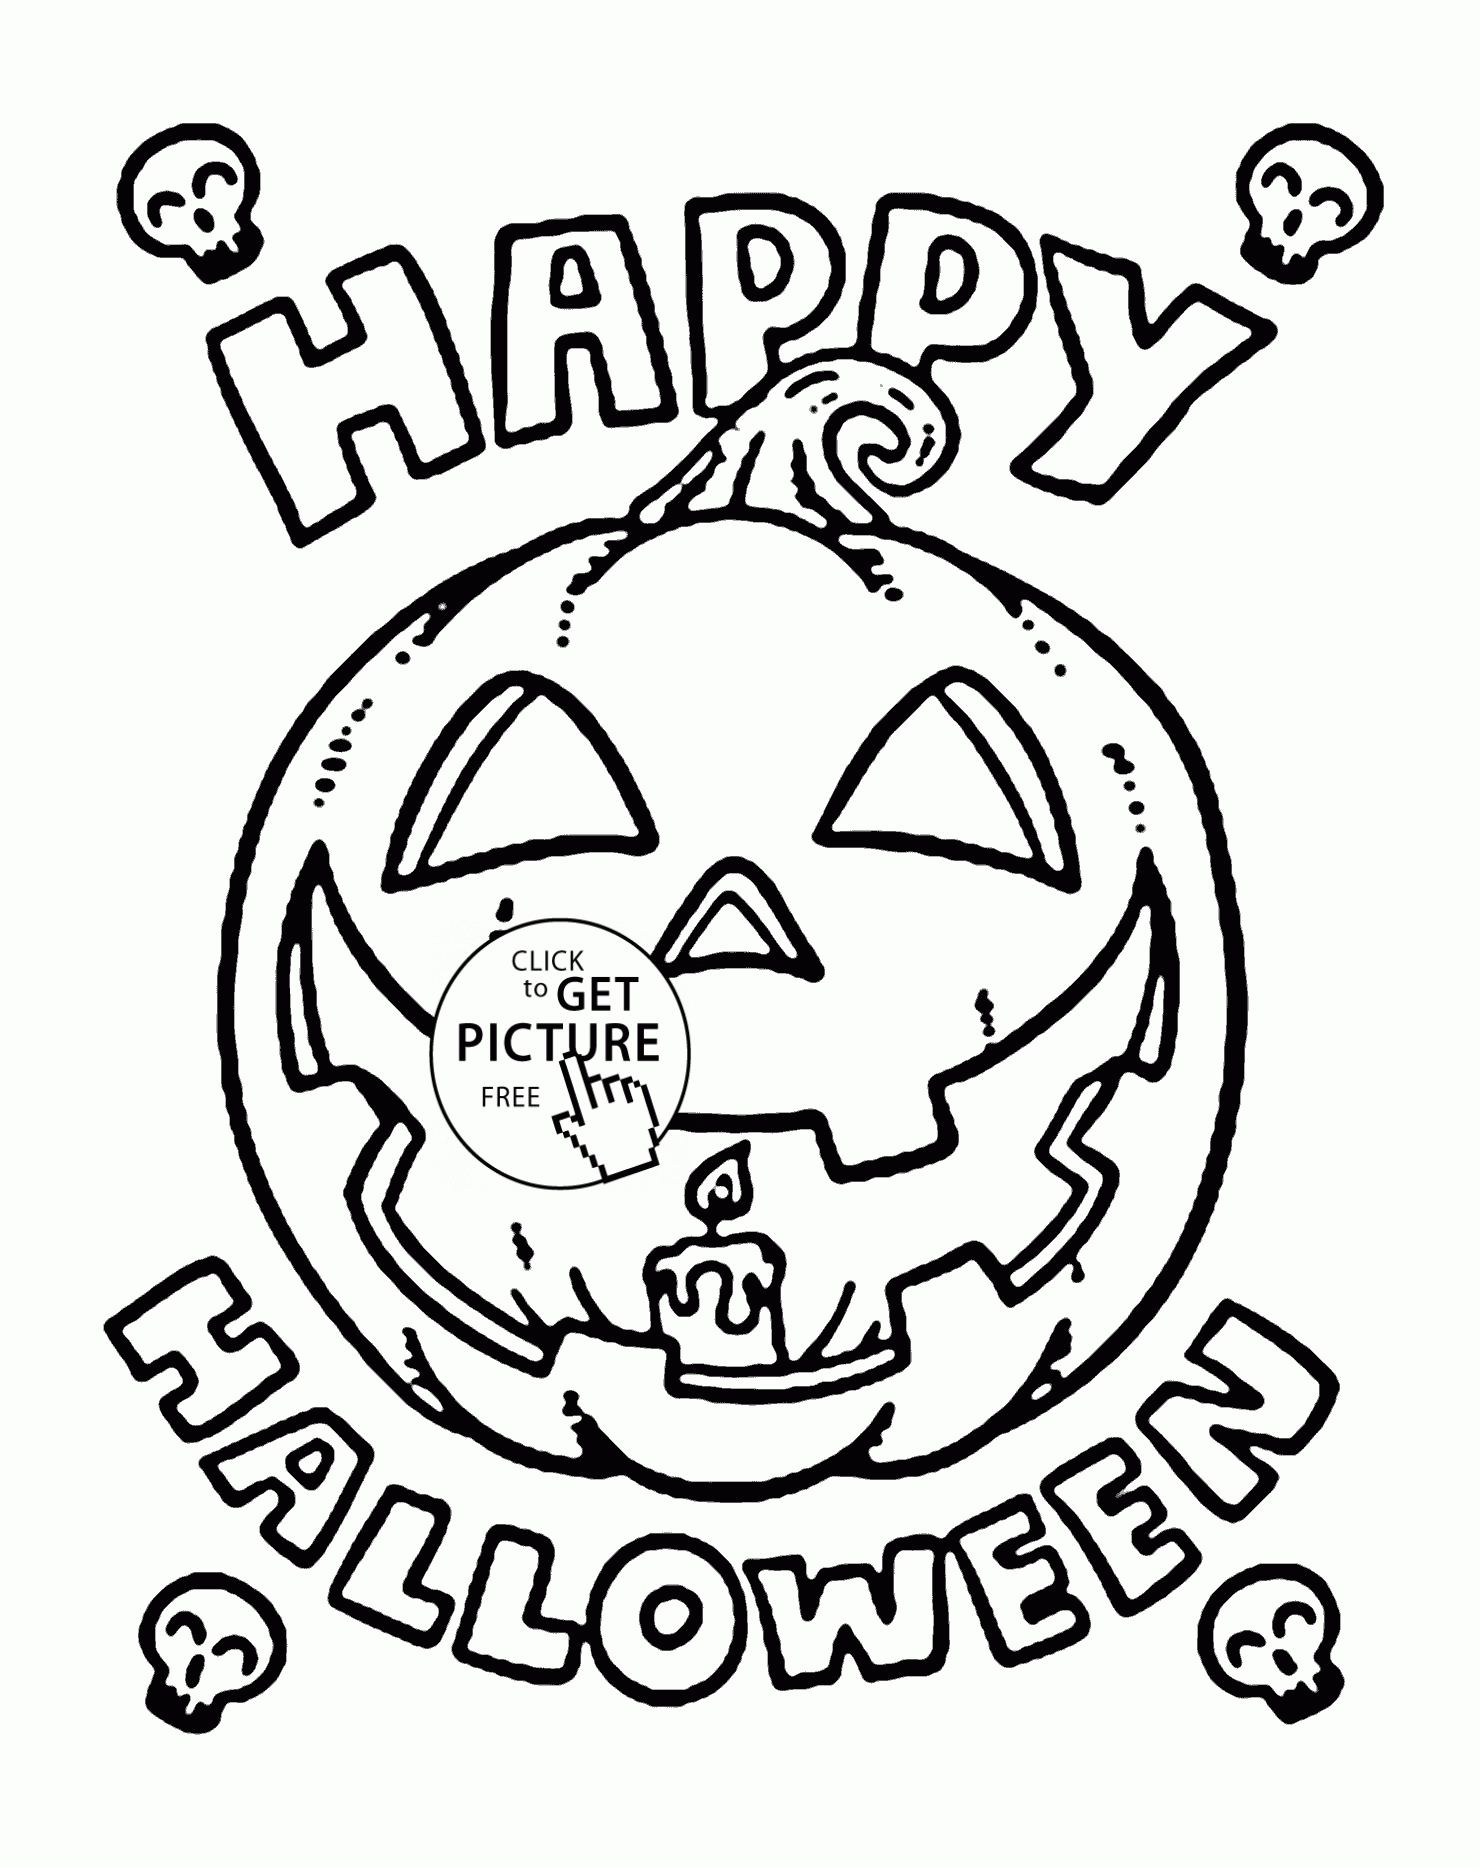 Happy Halloween Pumpkin Coloring Pages For Kids, Halloween - Free Halloween Pumpkin Printables